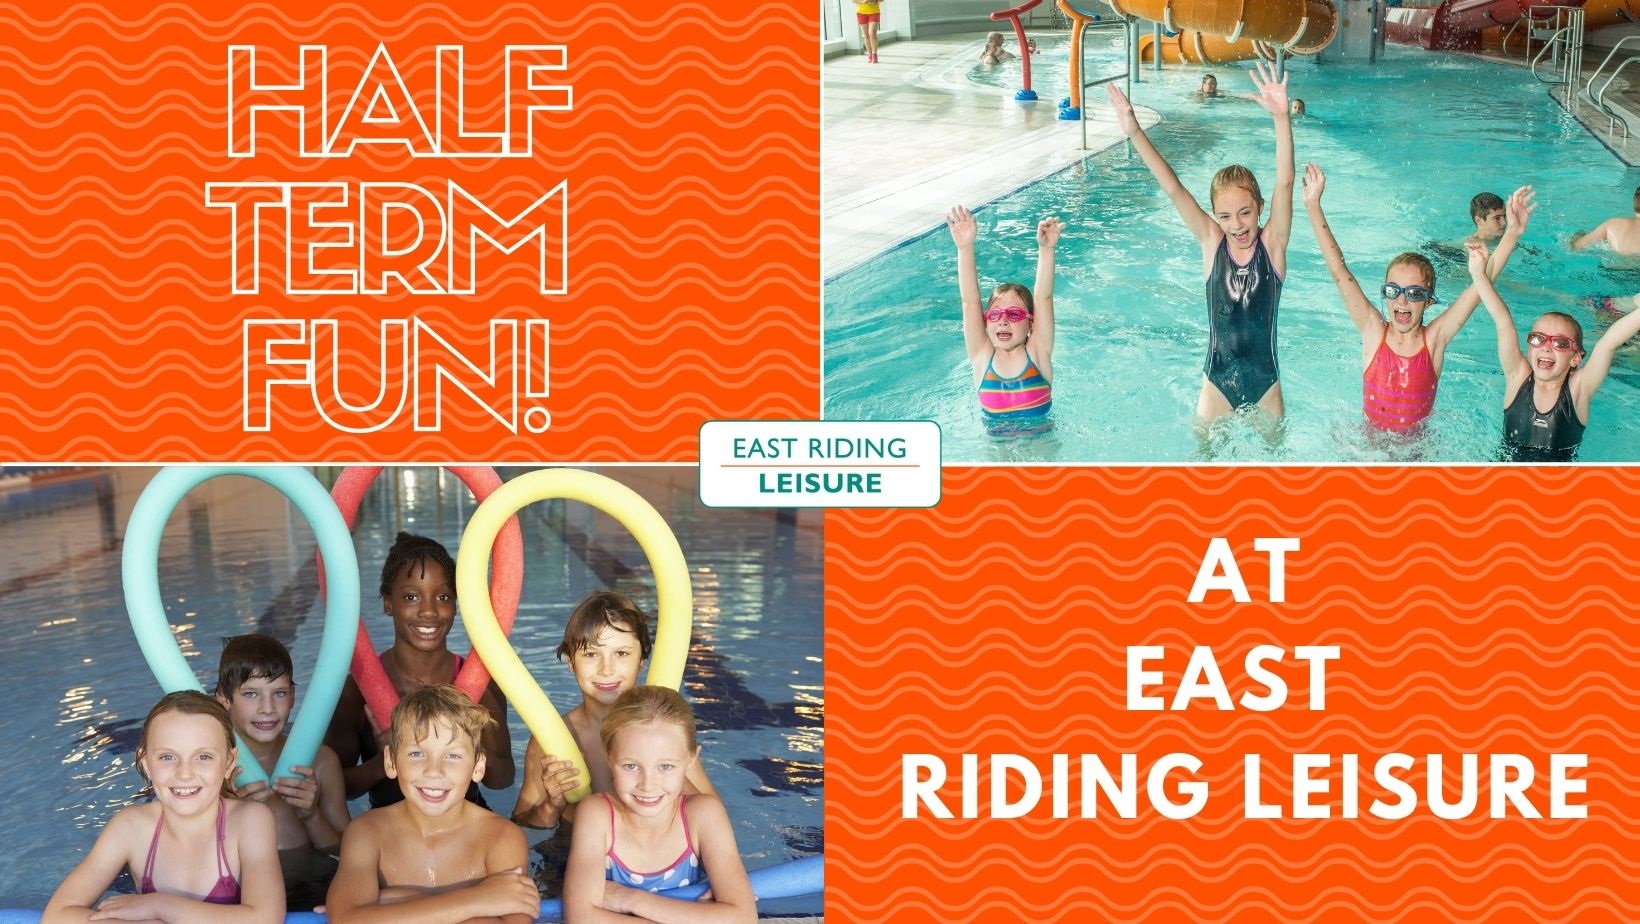 Half term activities at East Riding Leisure